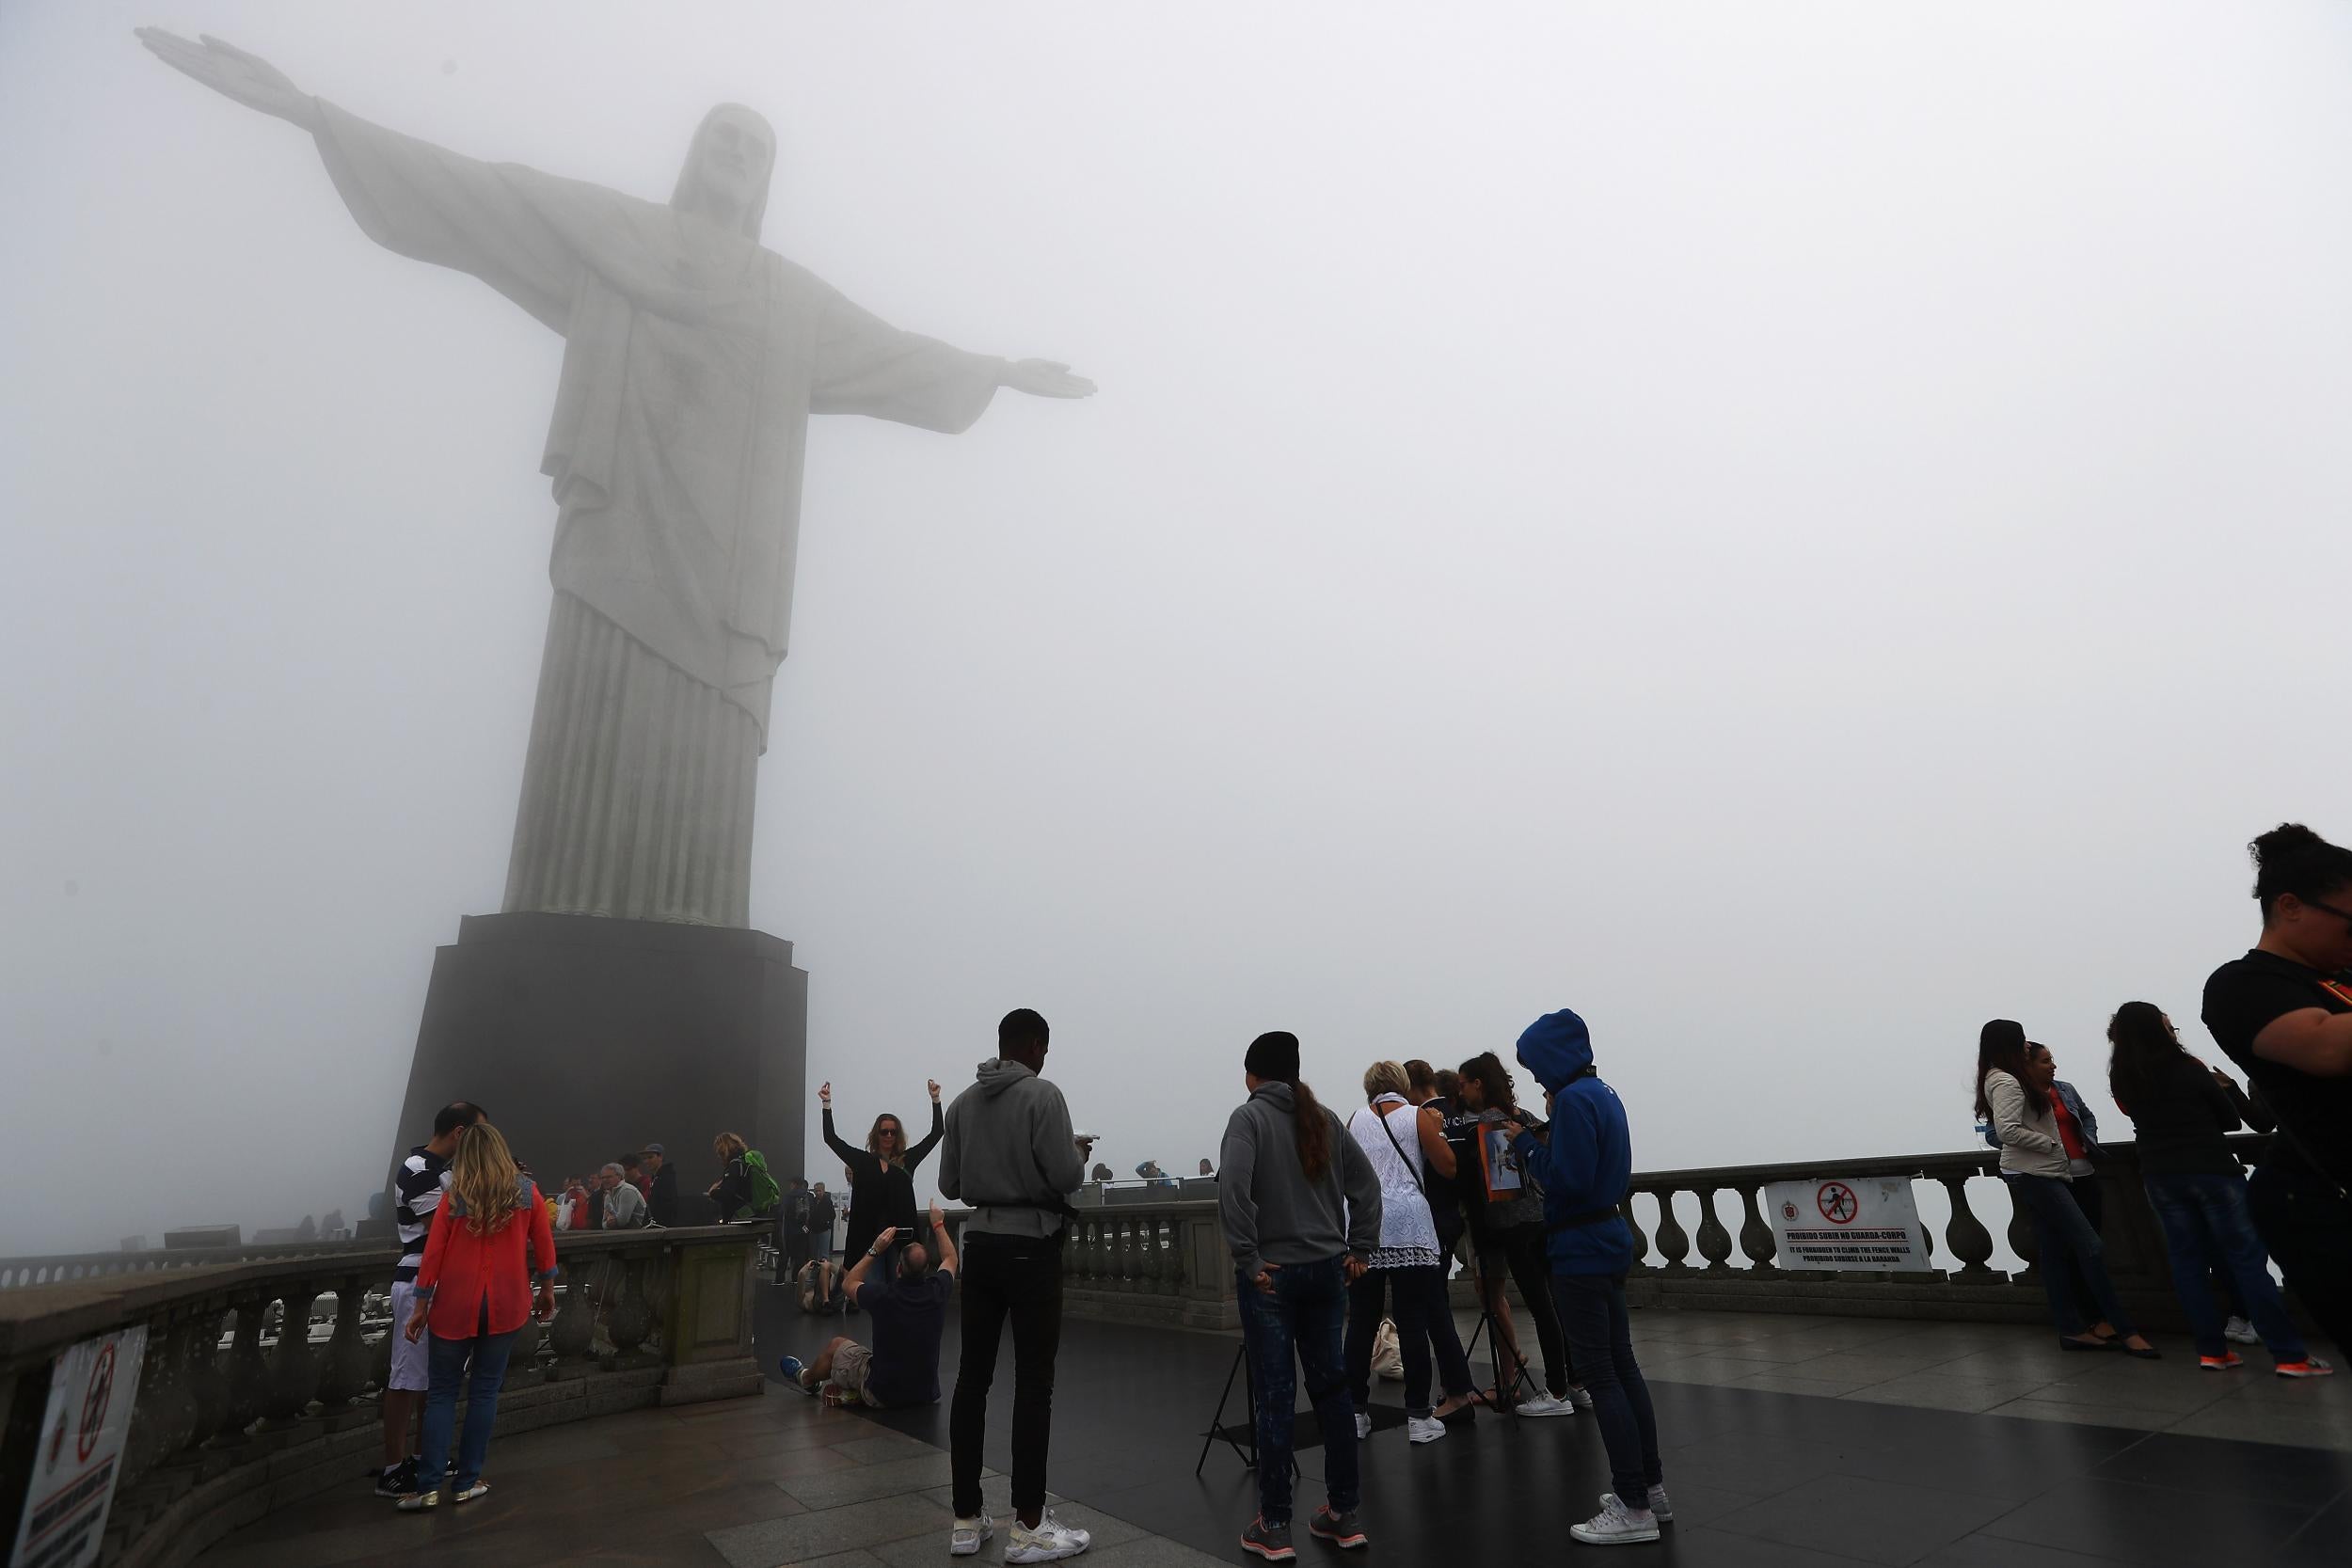 Clouds and mist sometimes spoil the view of Christ the Redeemer in Brazil